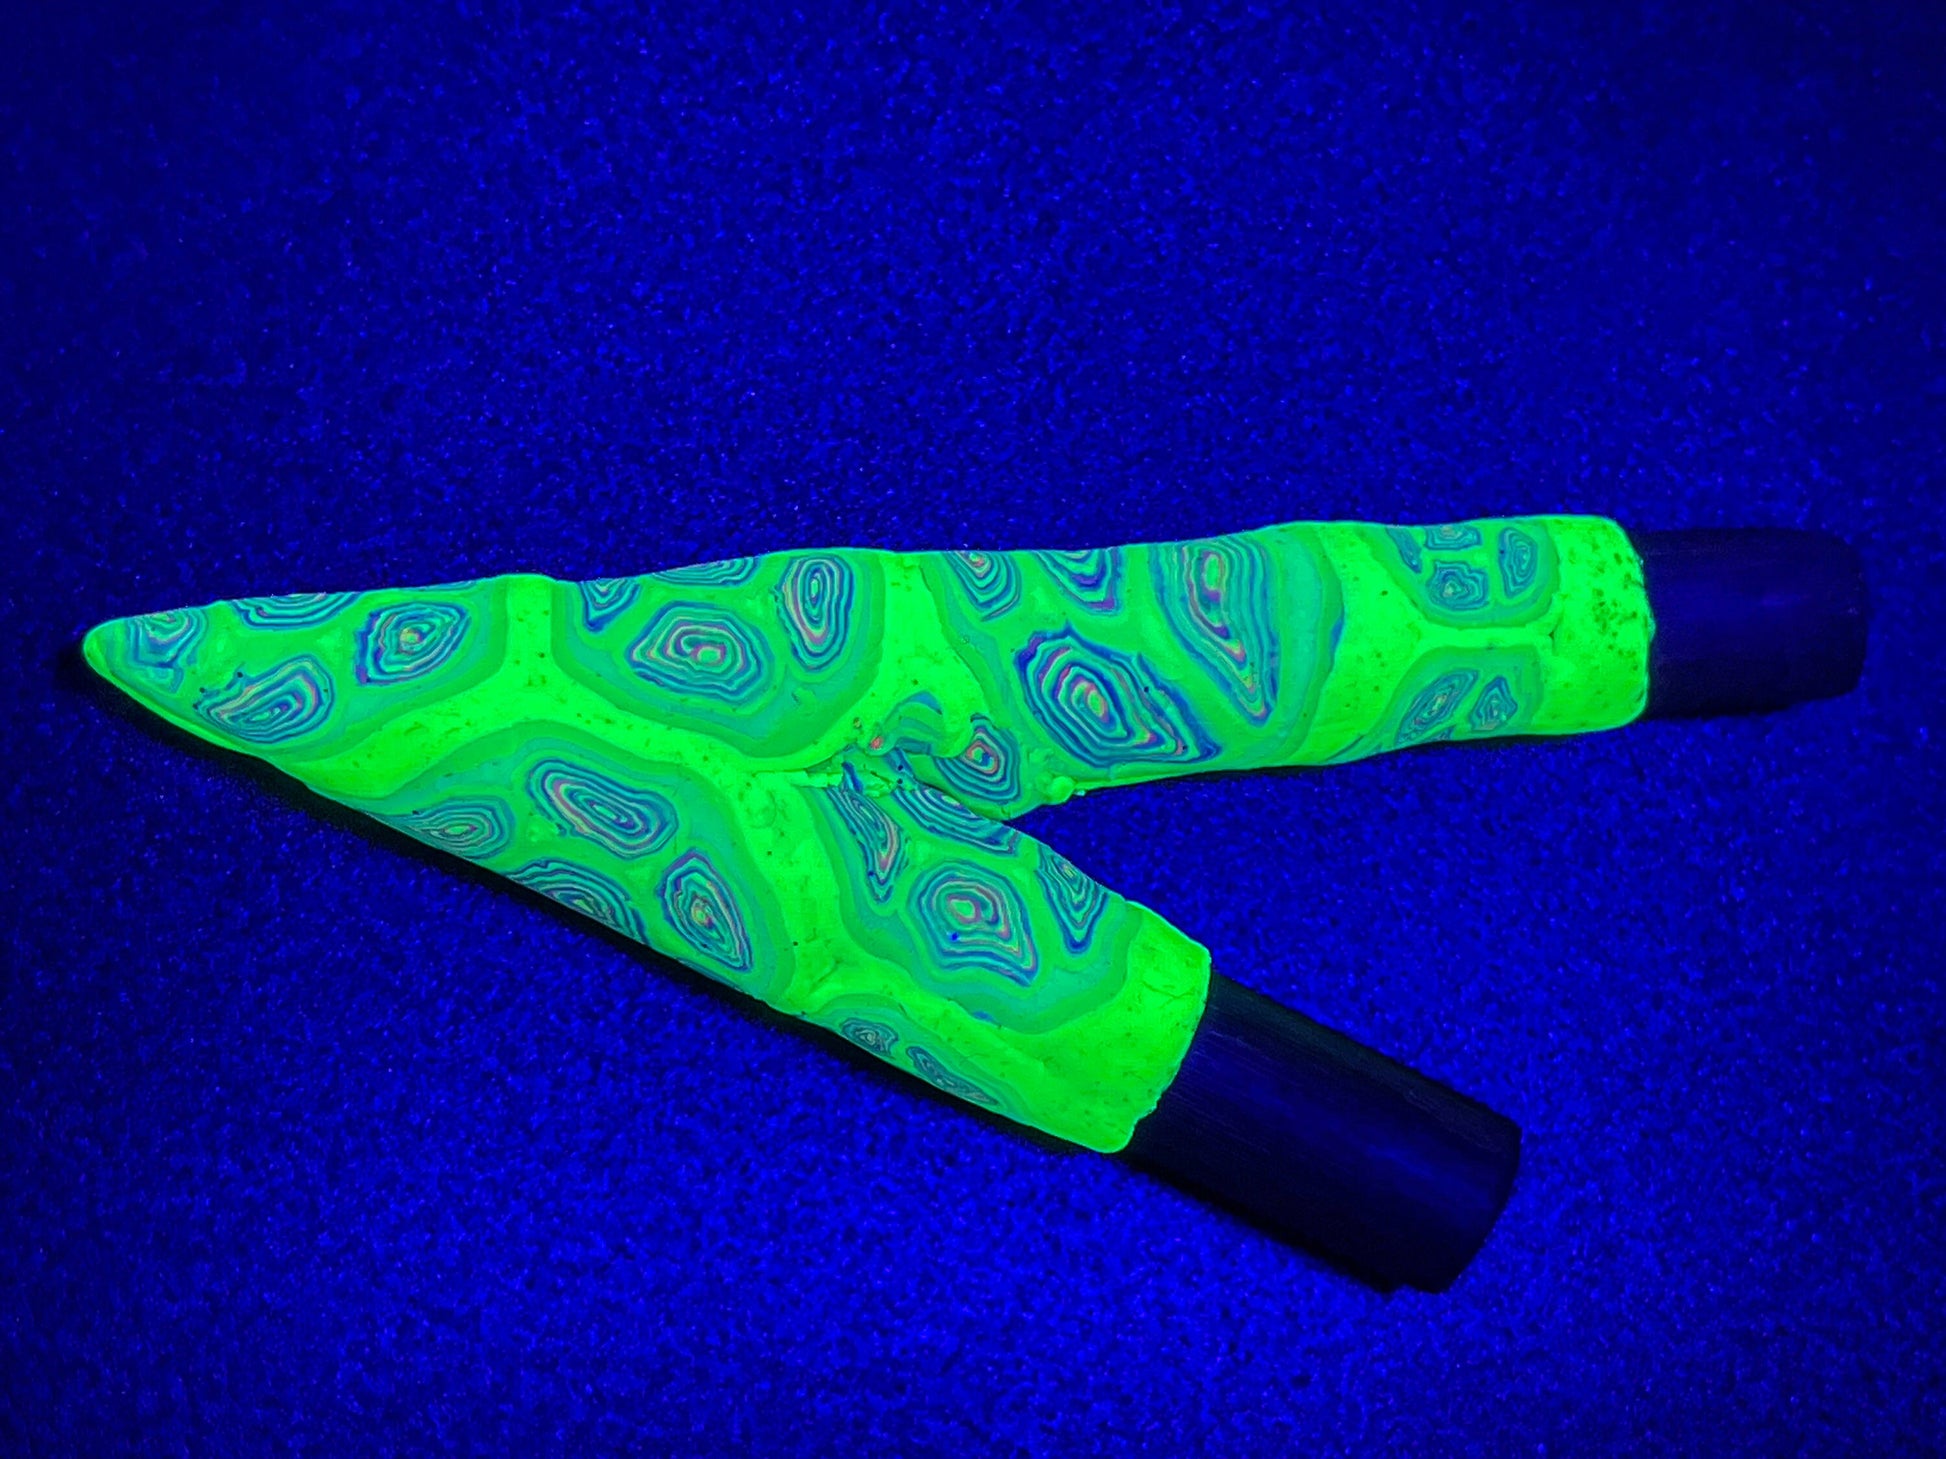 Green Flower Kuripe self applicator - Traditionally for Rapè - handmade UV glowing polymer clay eye candy psychedelic spiral made with love